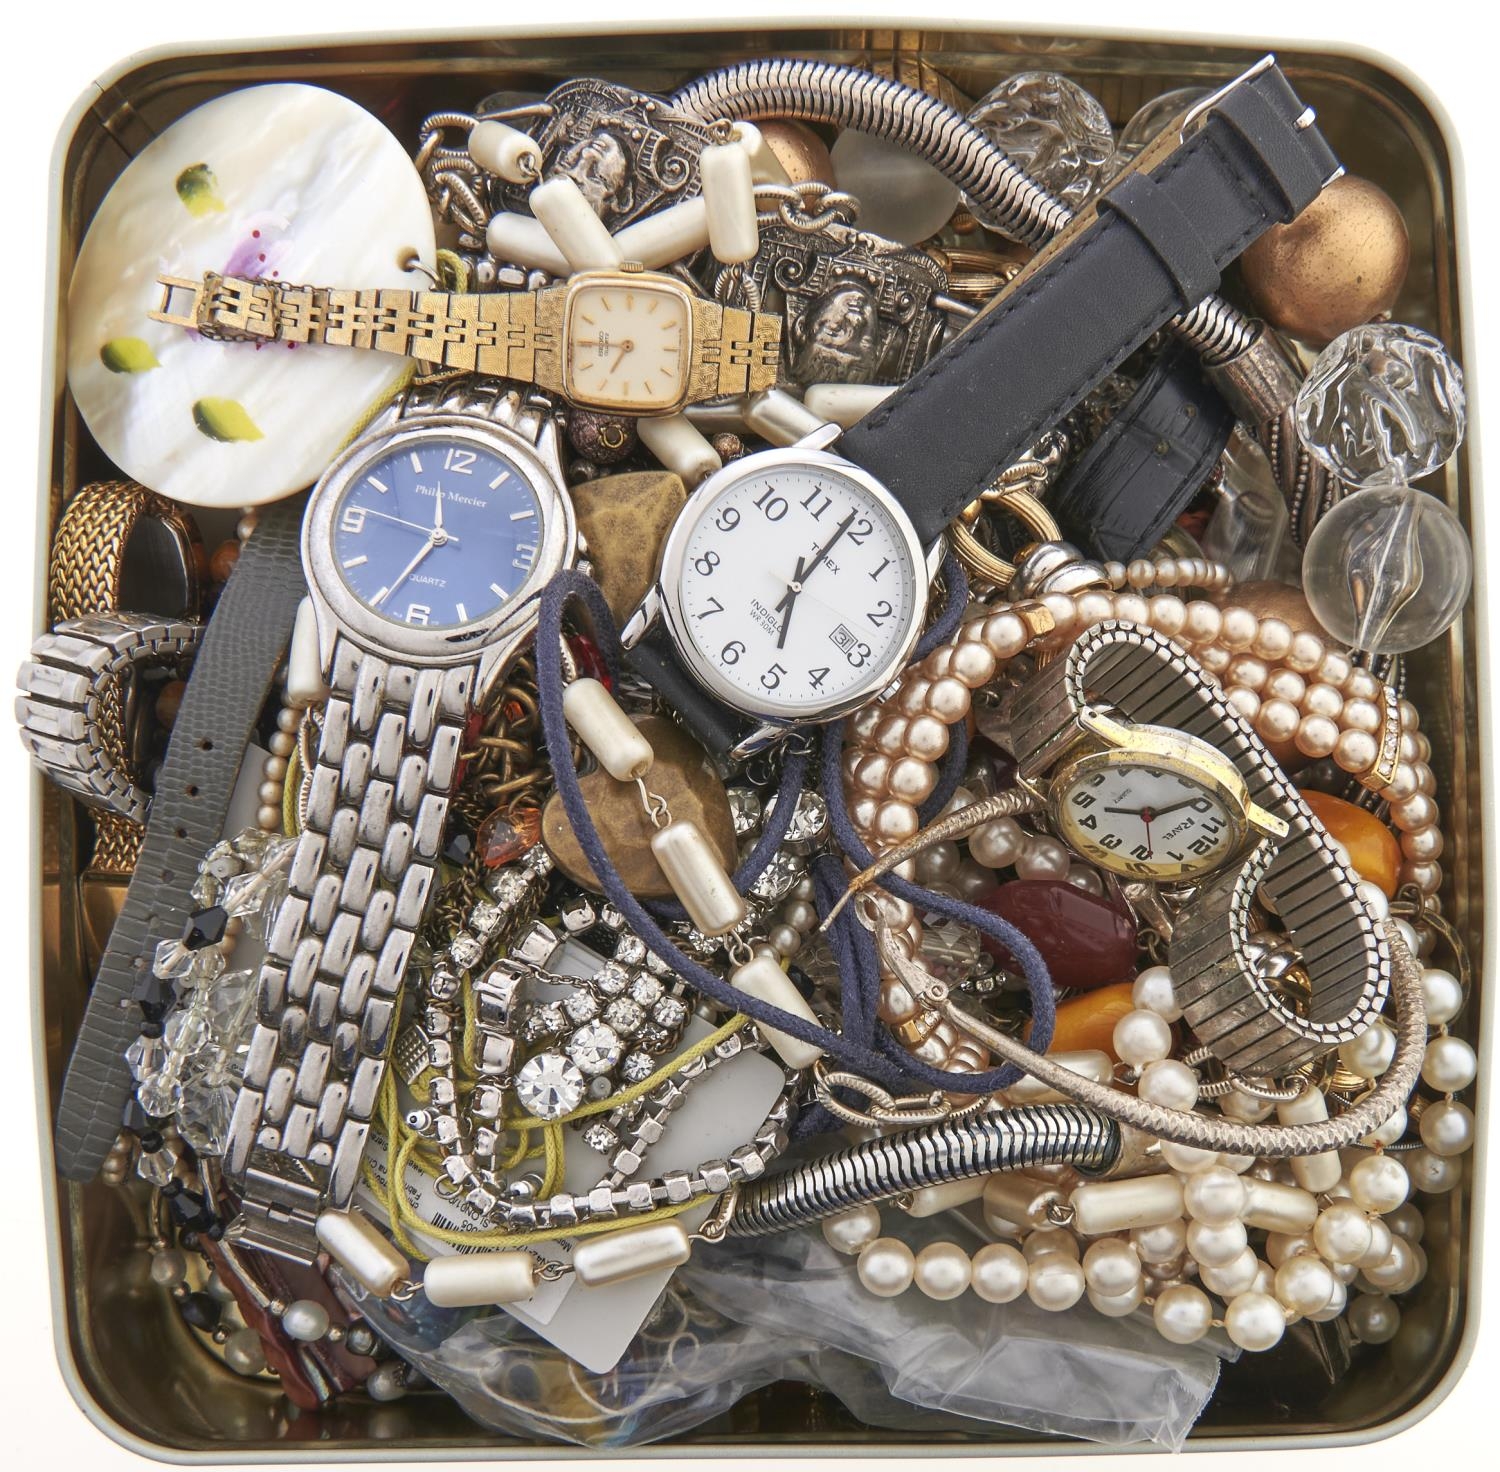 Miscellaneous vintage costume jewellery and watches